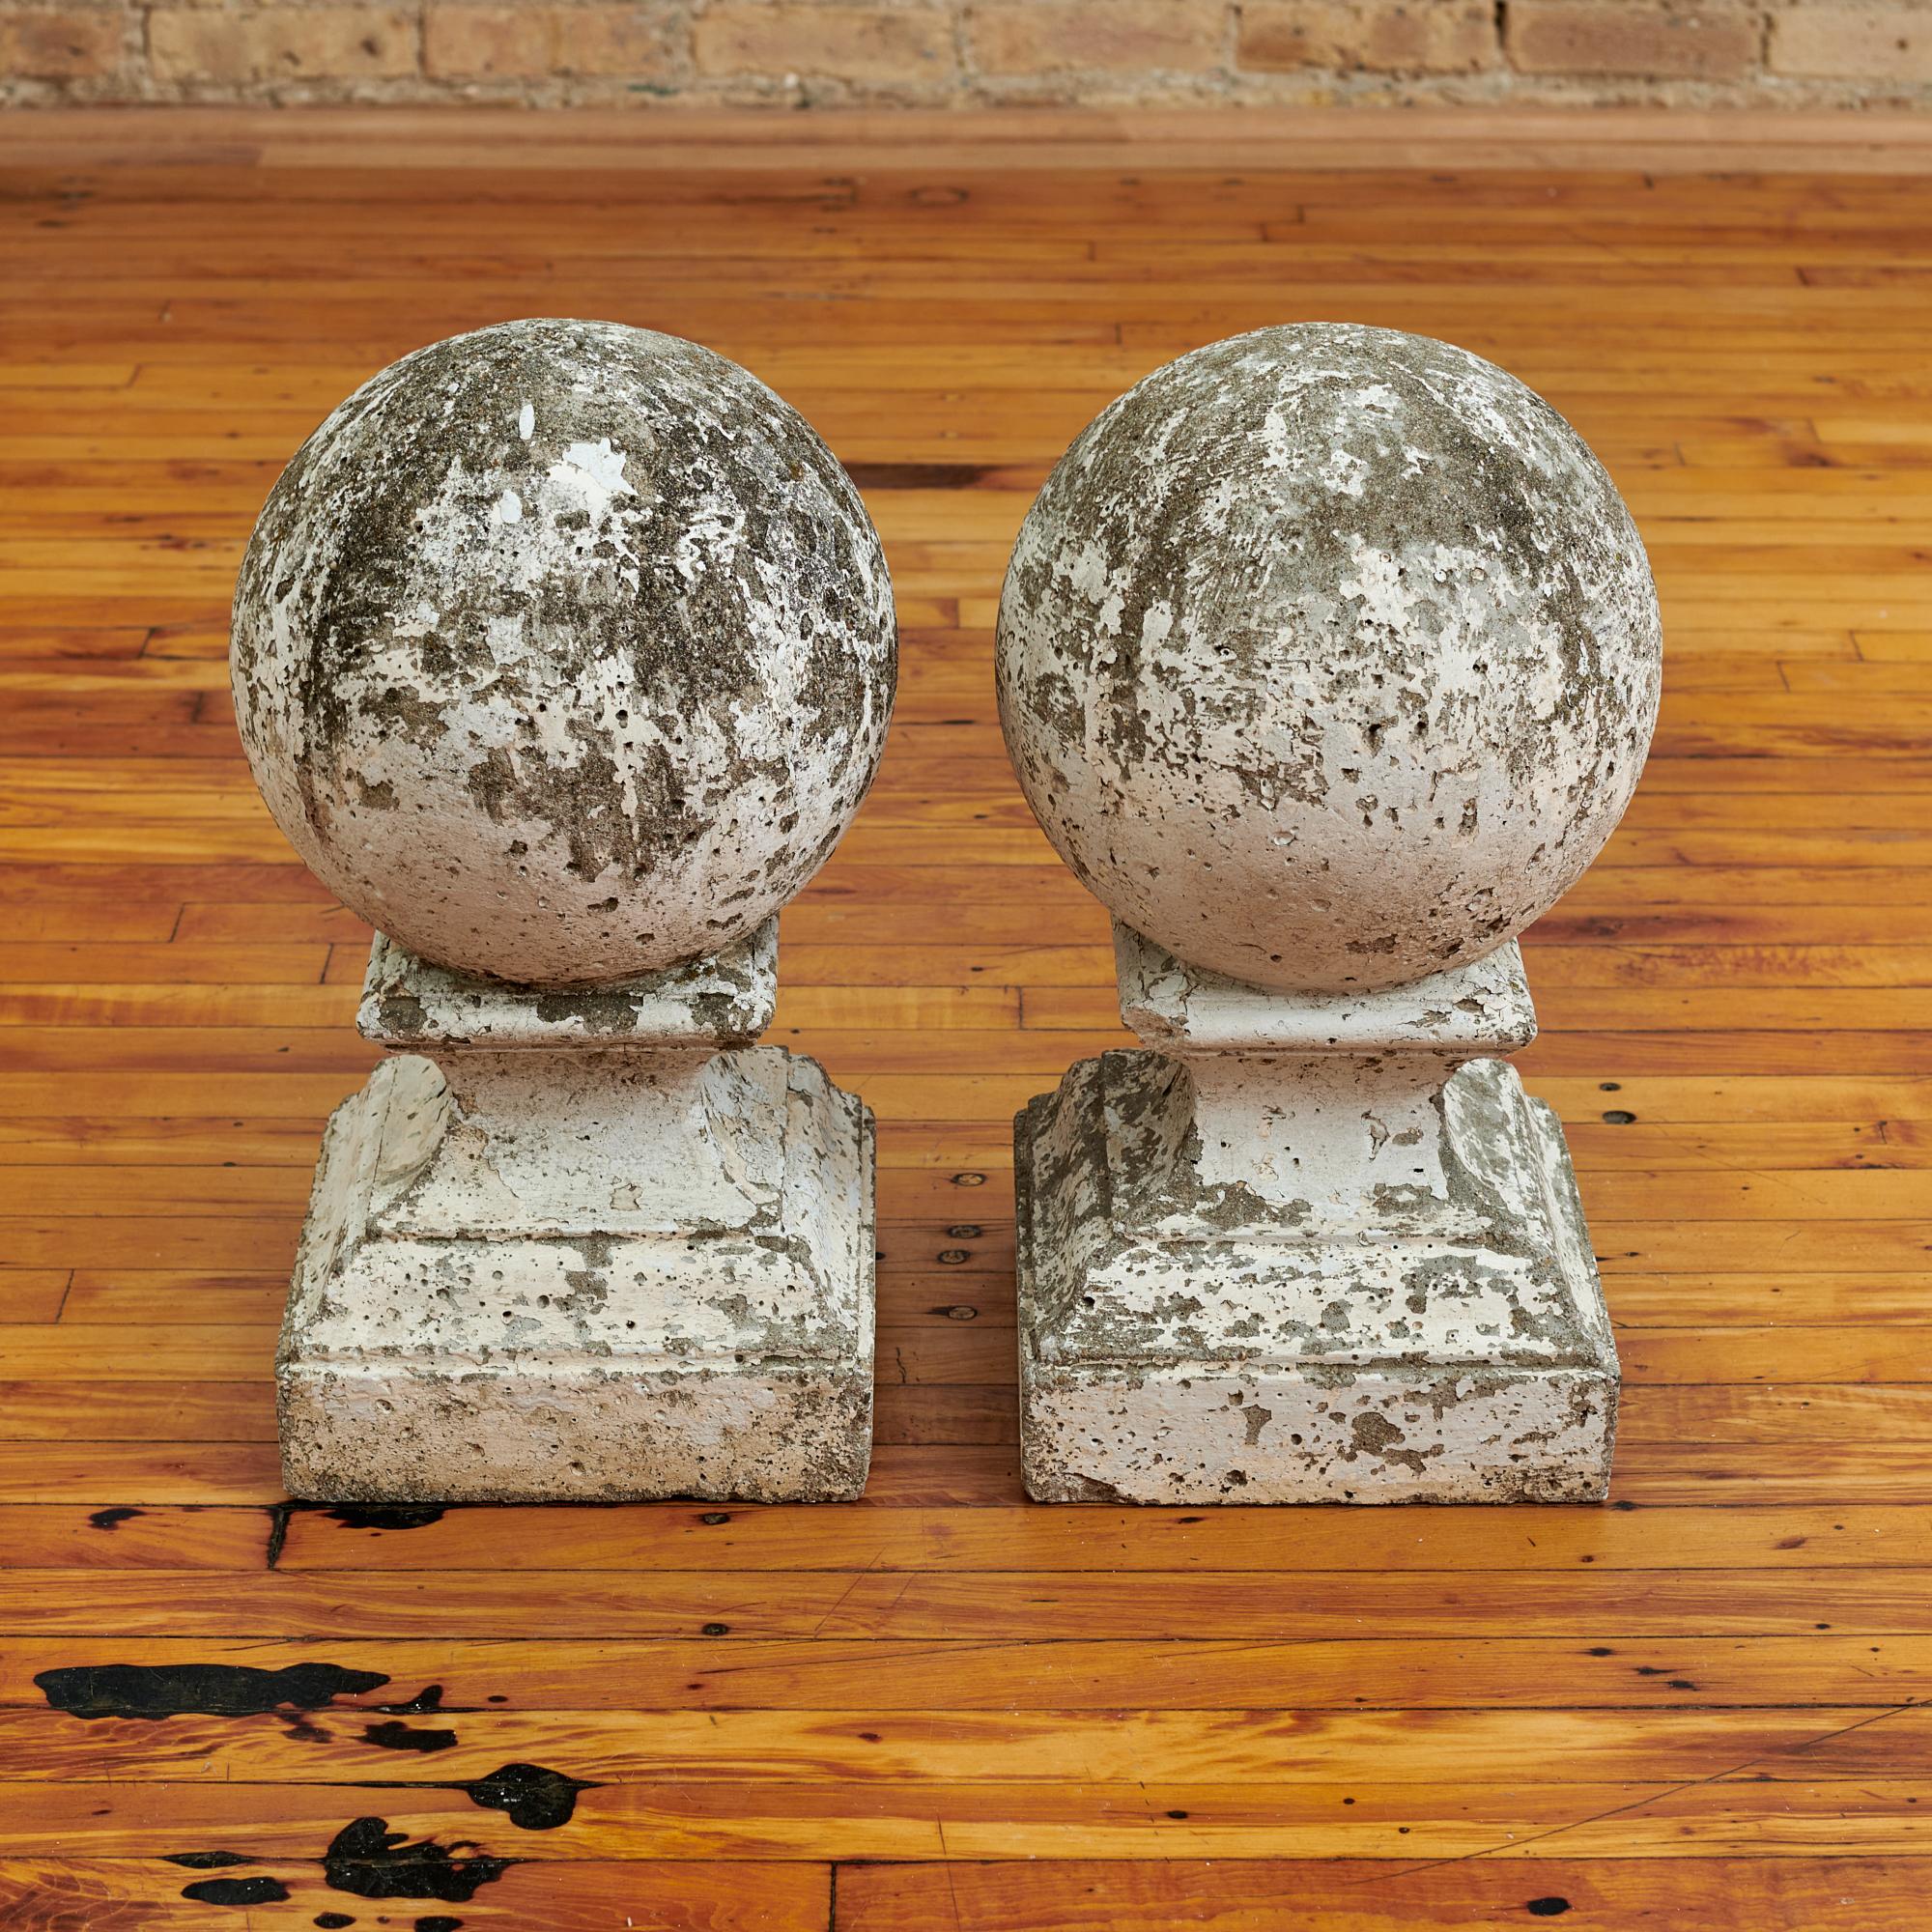 Pair of painted concrete finials from France, circa 1960s. These exhibit great character and patina from years of elements exposure. A beautifully classic accent whether used indoors or outside. 

Dimensions: 10